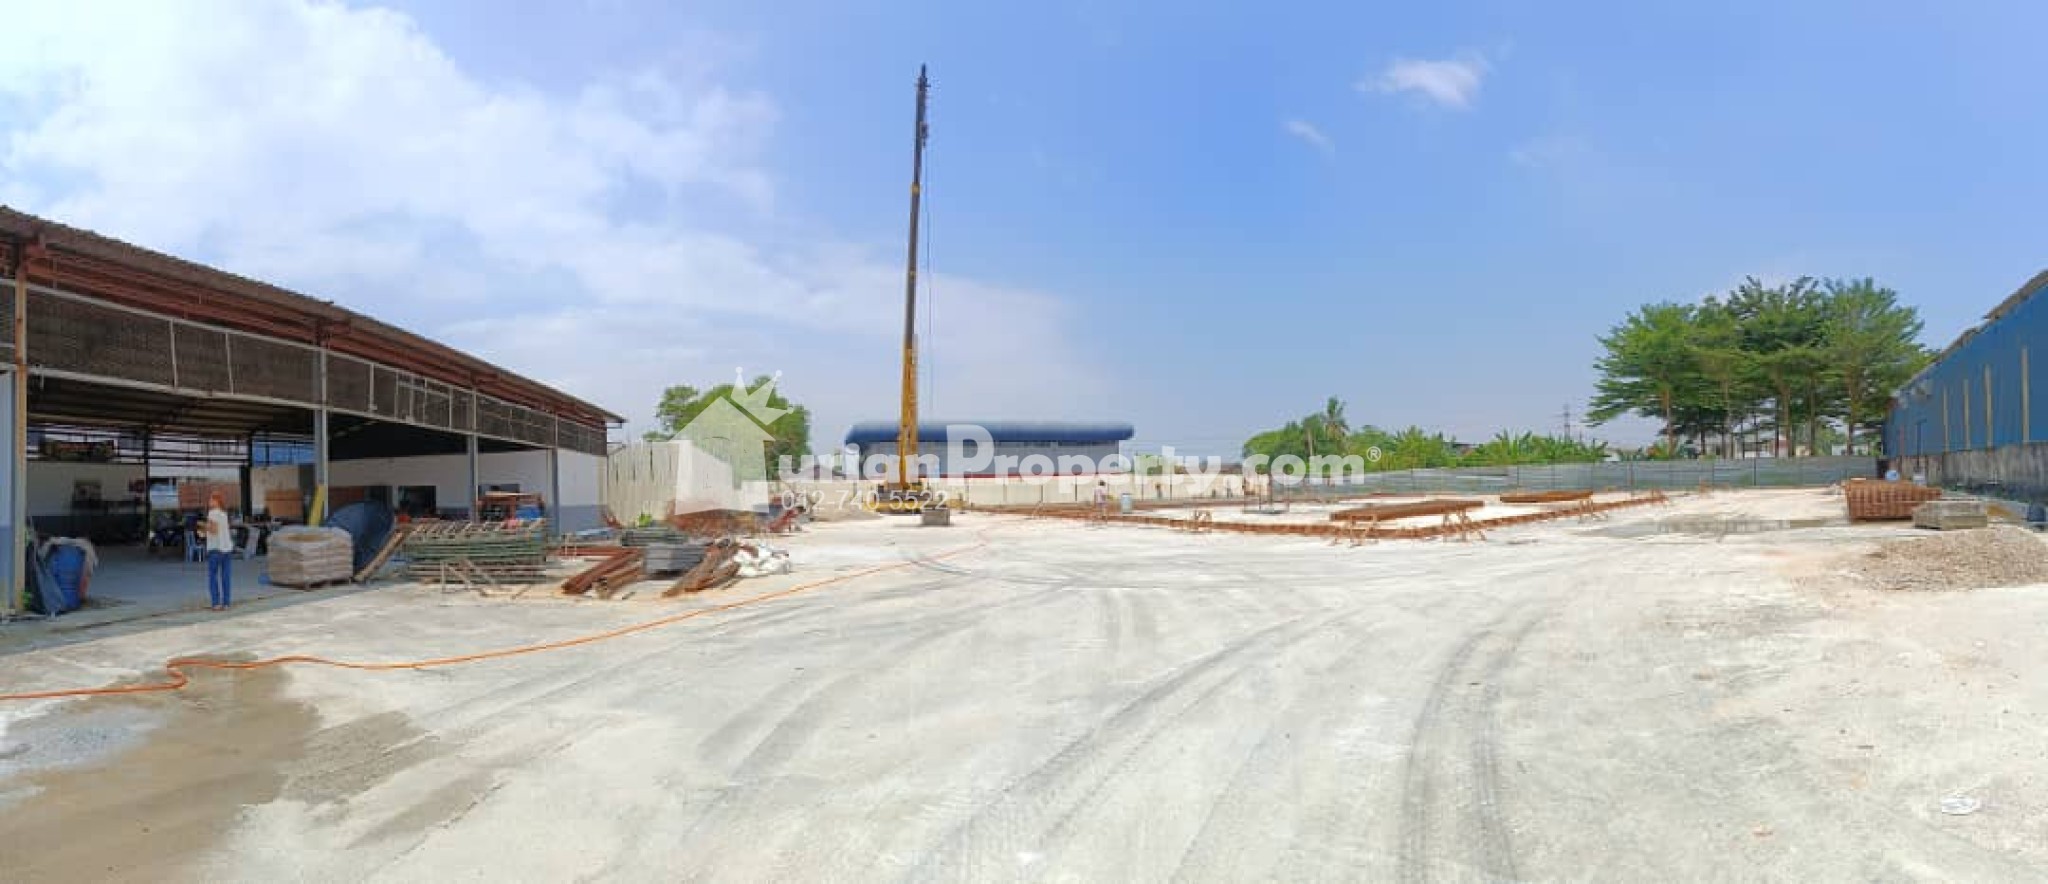 Detached Factory For Rent at Taman Perindustrian Puchong